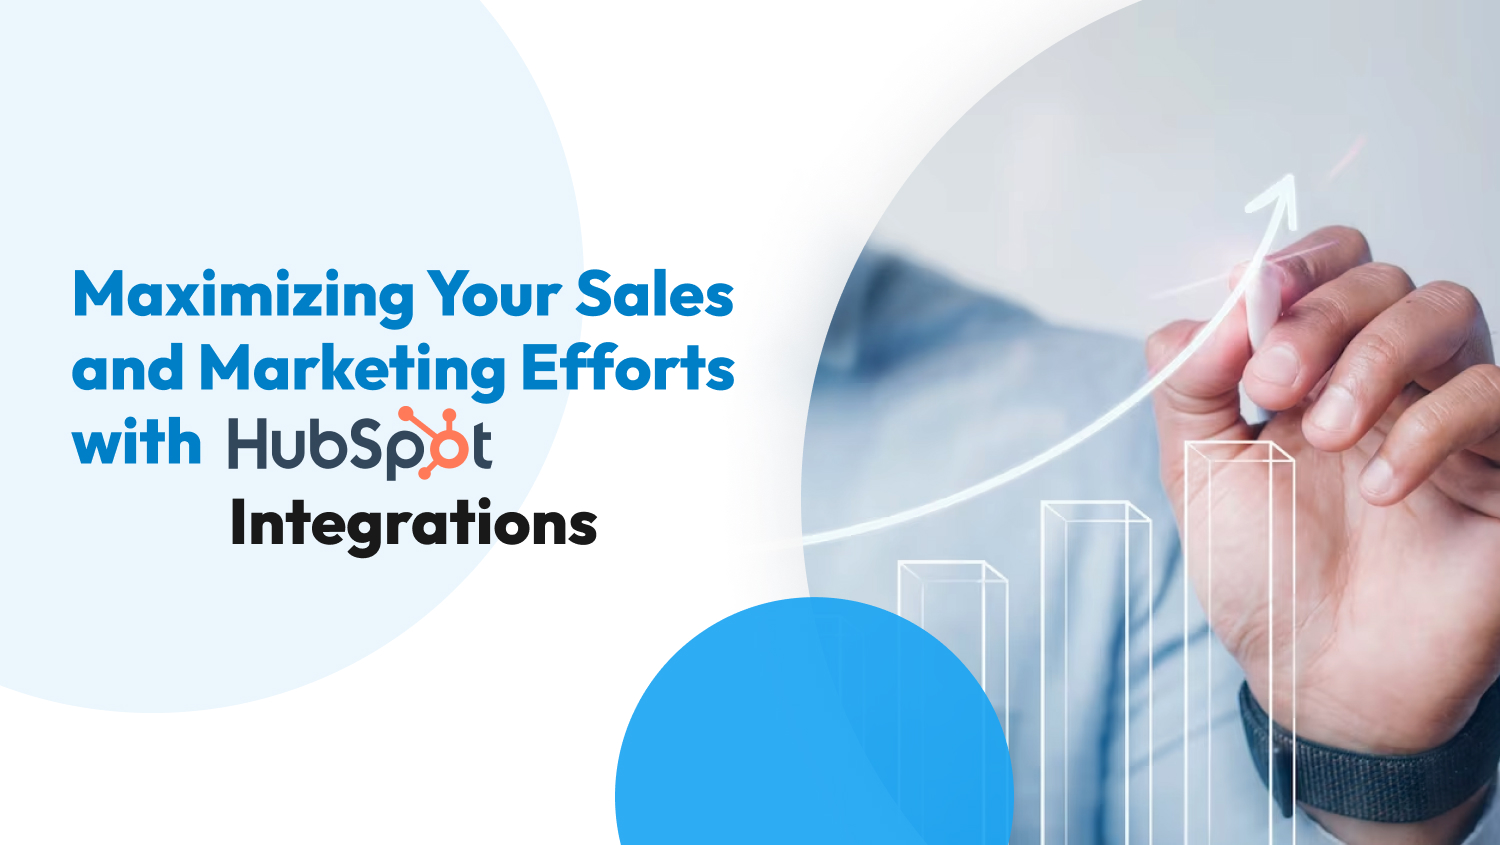 Maximizing Your Sales and Marketing Efforts with HubSpot Integrations